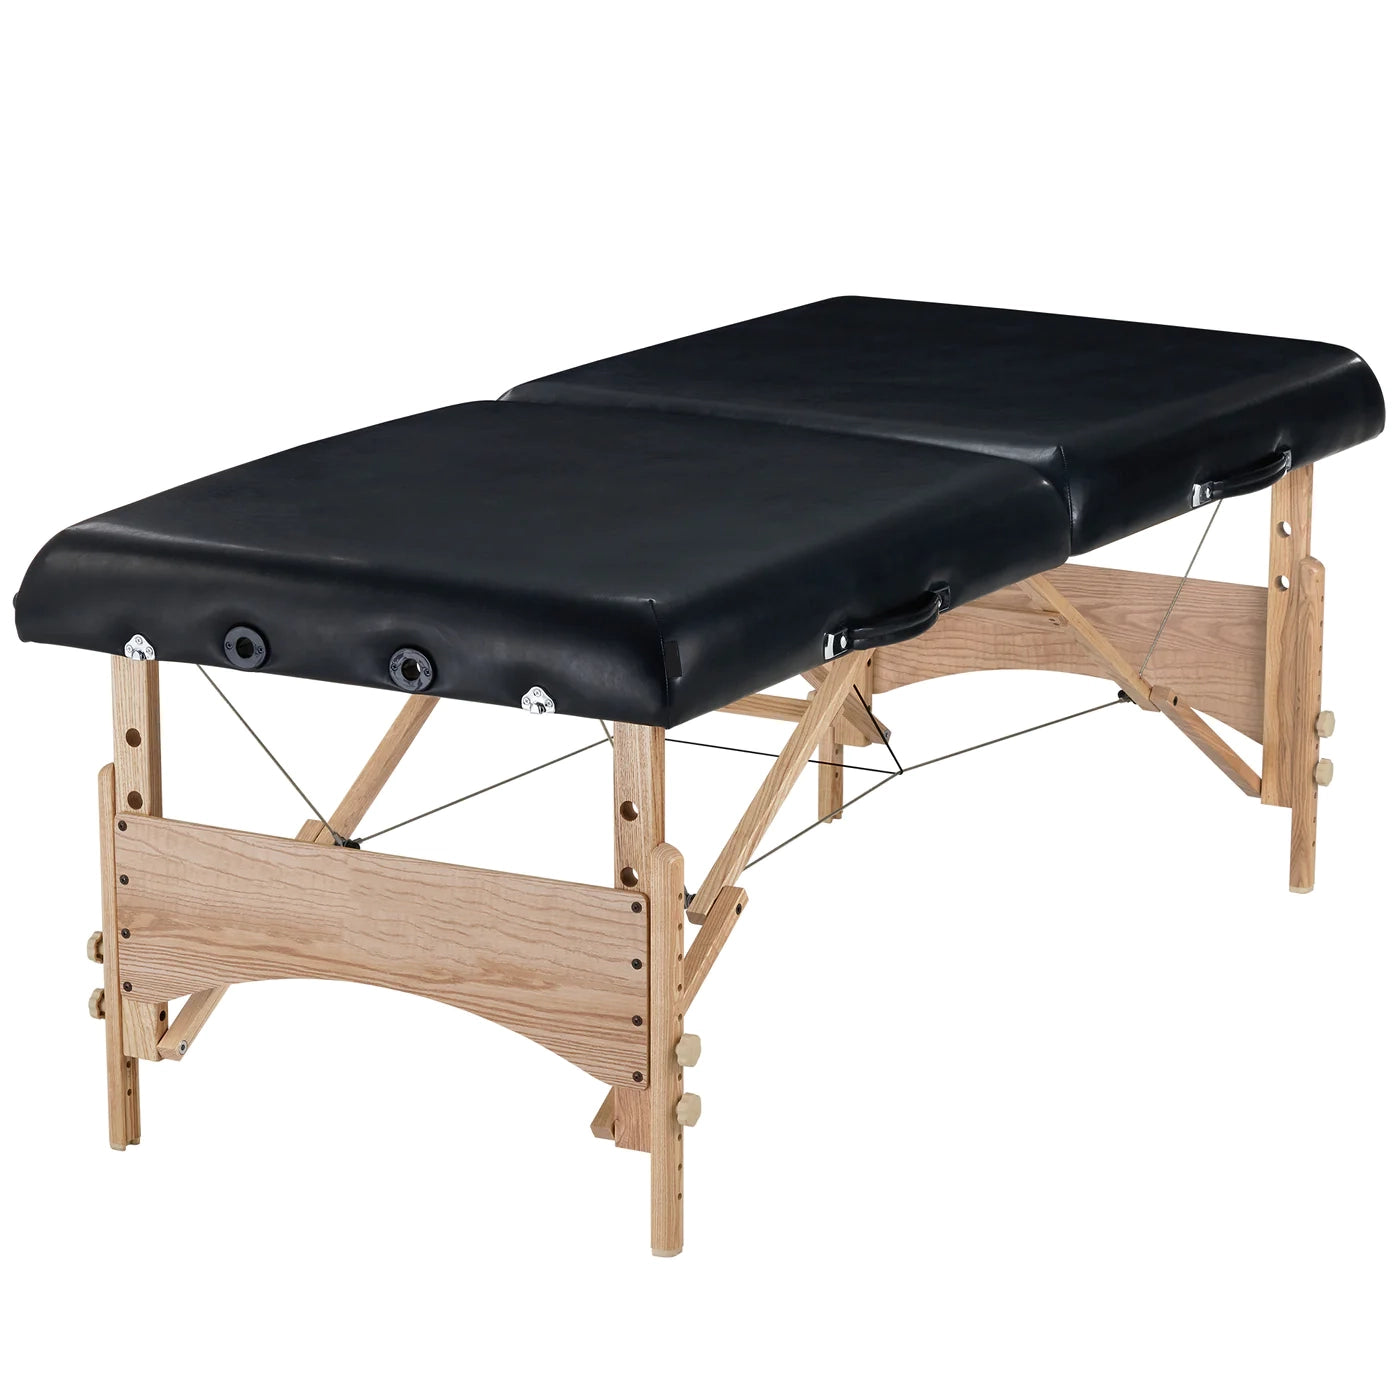 Bella2bello 32" HUSKY GIBRALTAR™ XXL Portable Massage Table Package - Built for LARGER Clients! Supports an Enormous 3,200 lbs! (Black Color)